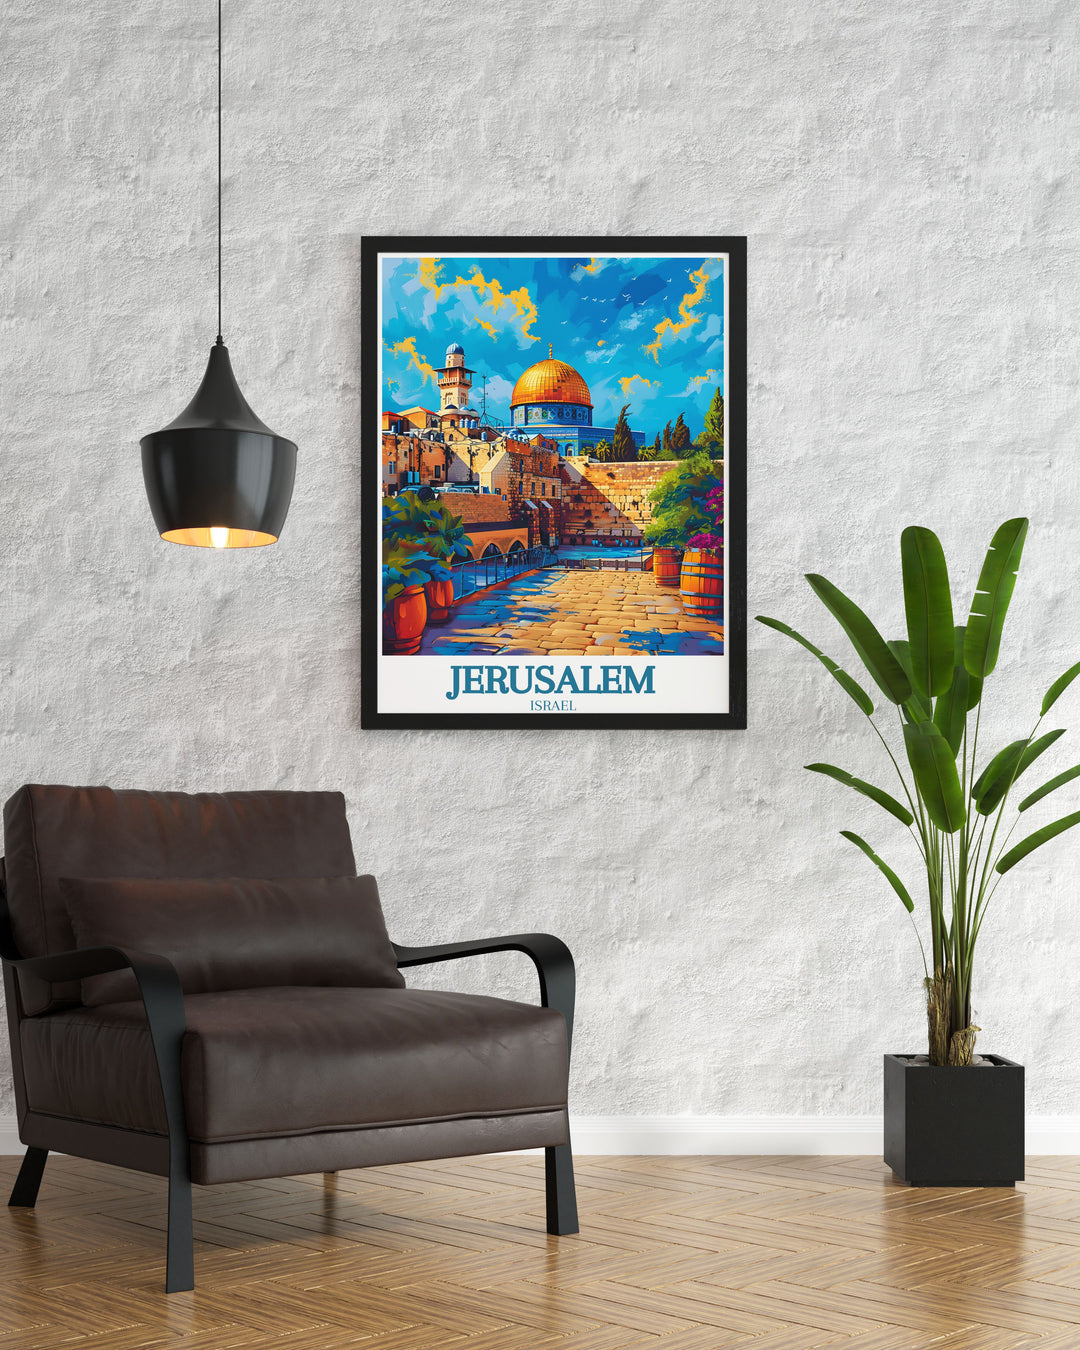 Celebrating Jerusalems rich heritage, this poster showcases landmarks and scenes that tell the story of the citys diverse past. Perfect for those who love exploring history, this artwork brings the culture of Jerusalem into your home.